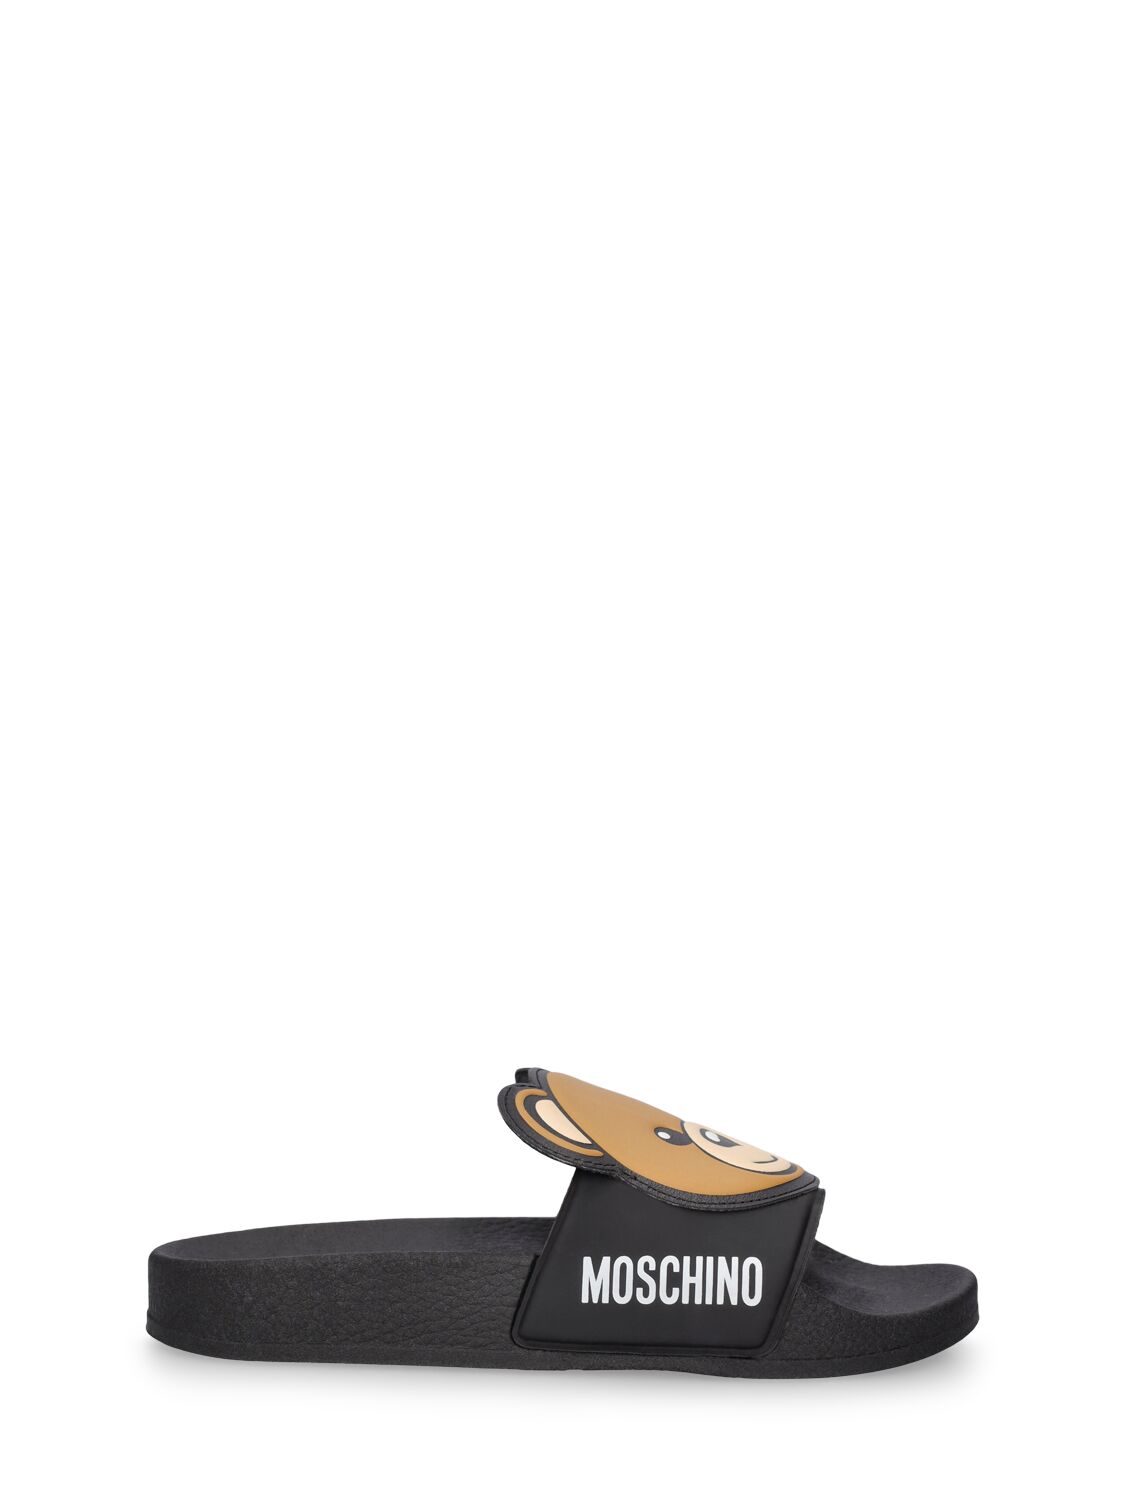 Image of Logo Print Rubber Slide Sandals W/ Patch